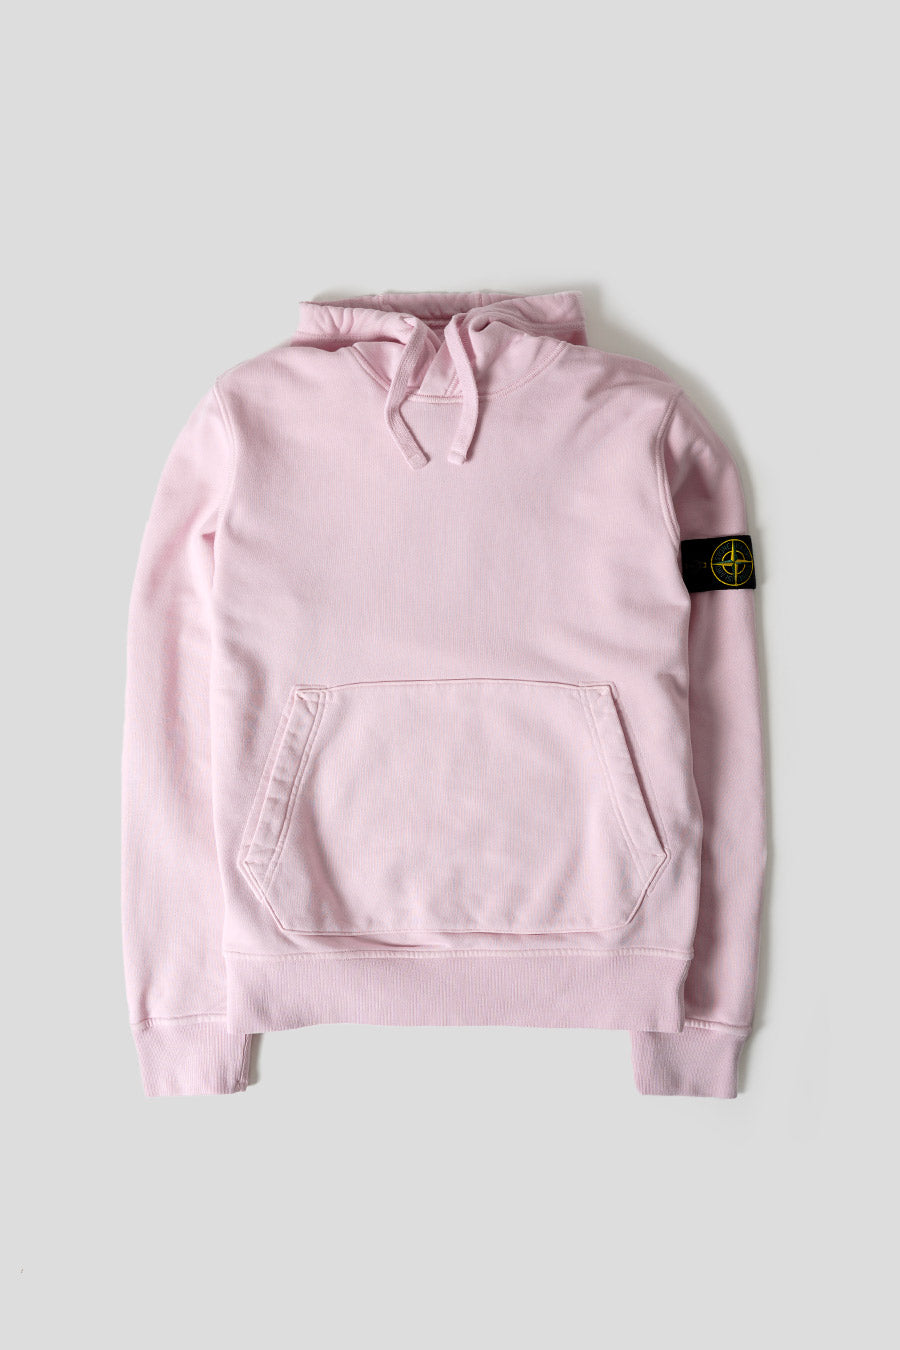 Stone Island - PINK HOODIE - LE LABO STORE